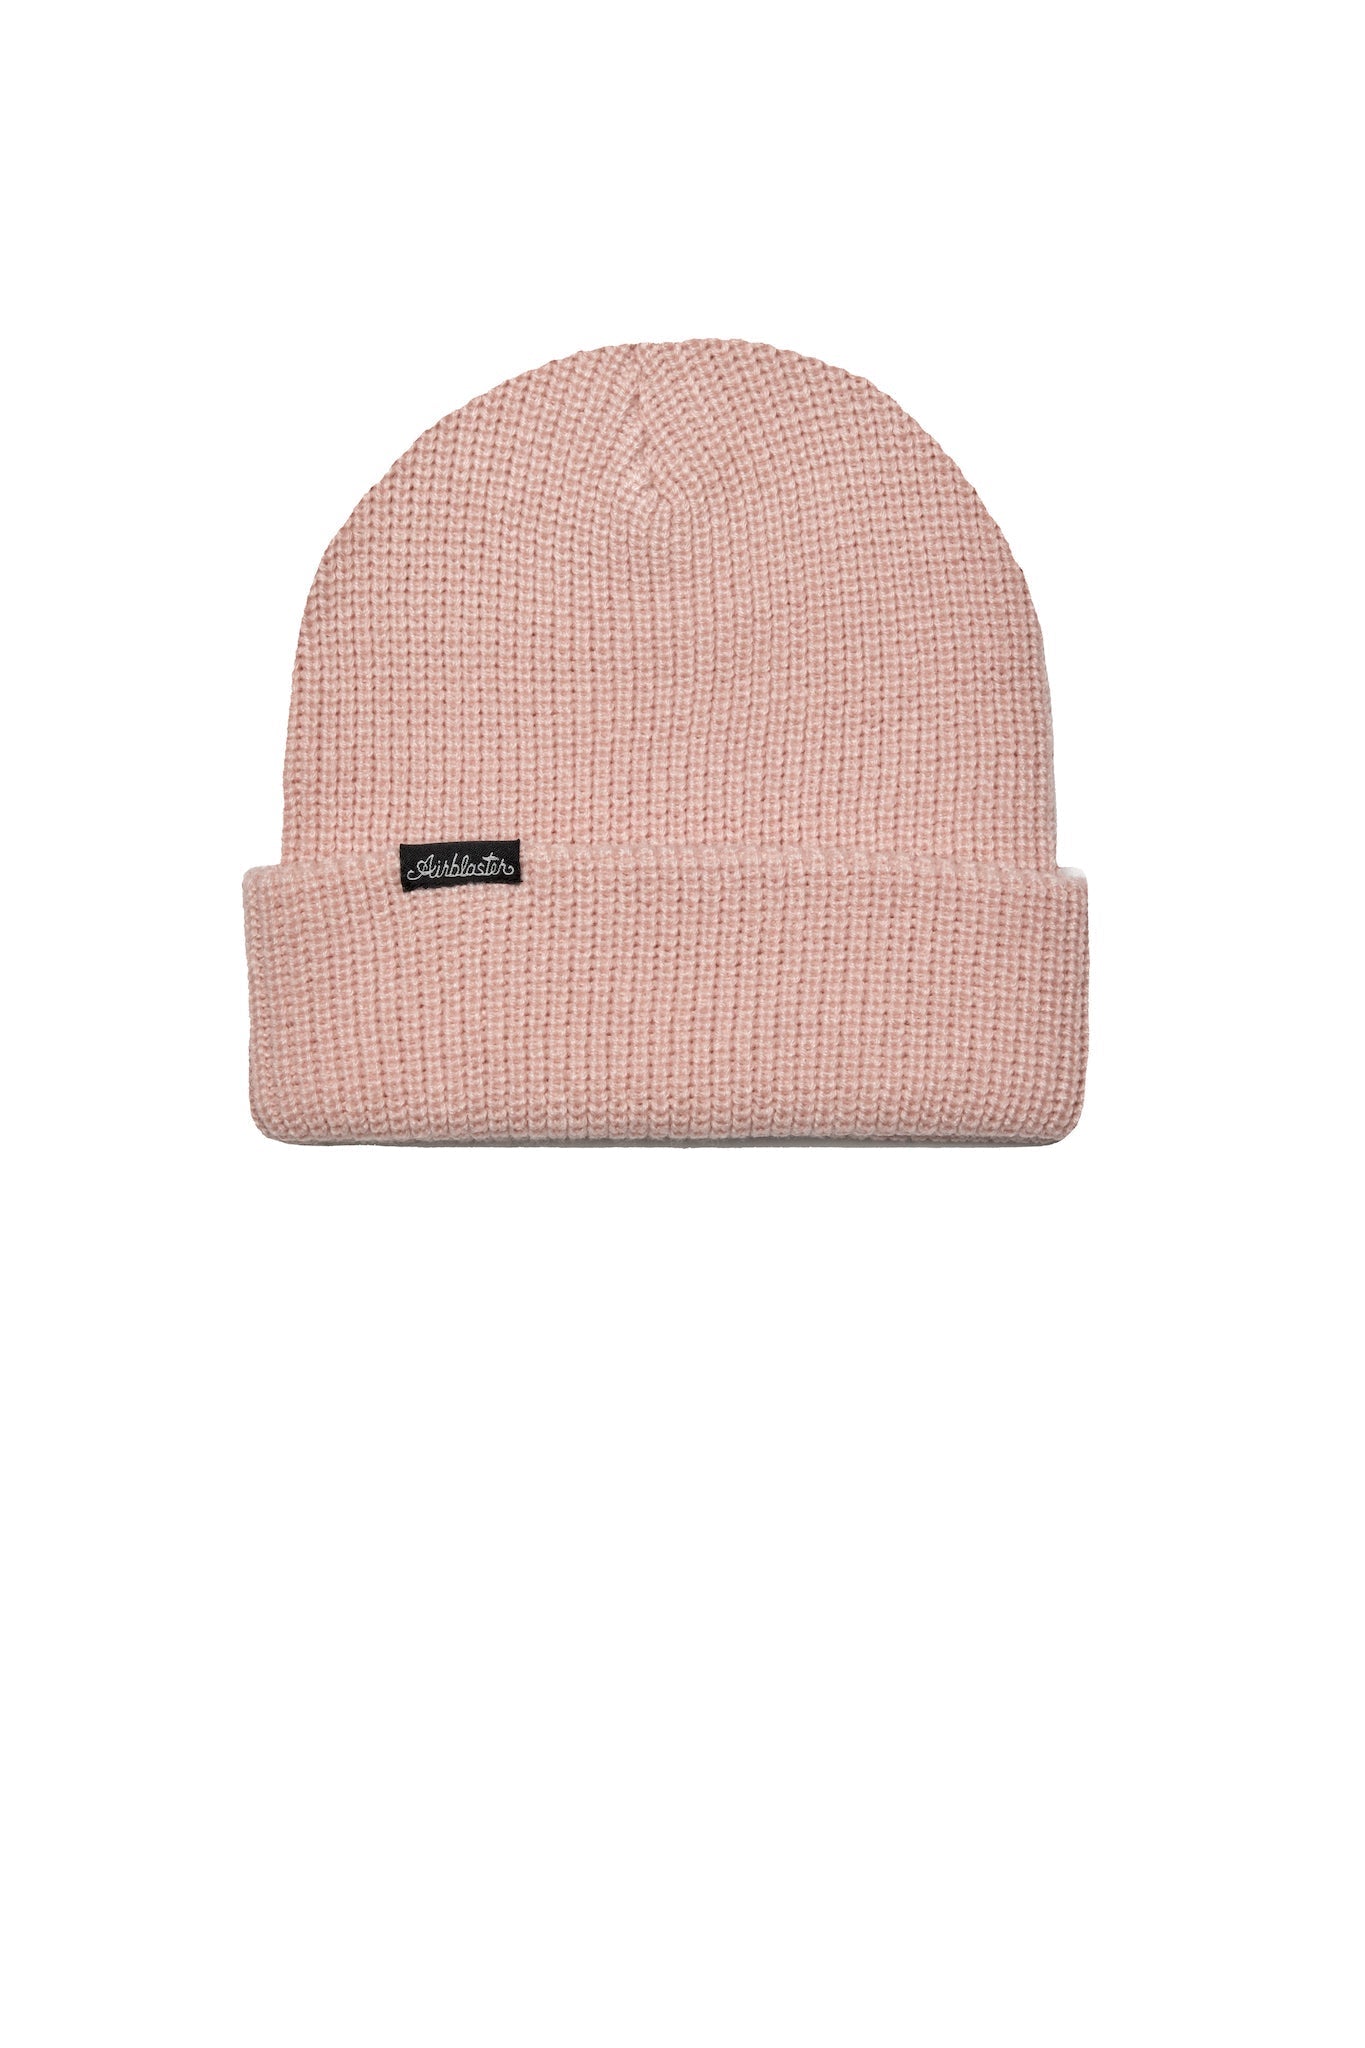 tuque-commodity-airblaster-beanie-dm2-shop-light-pink